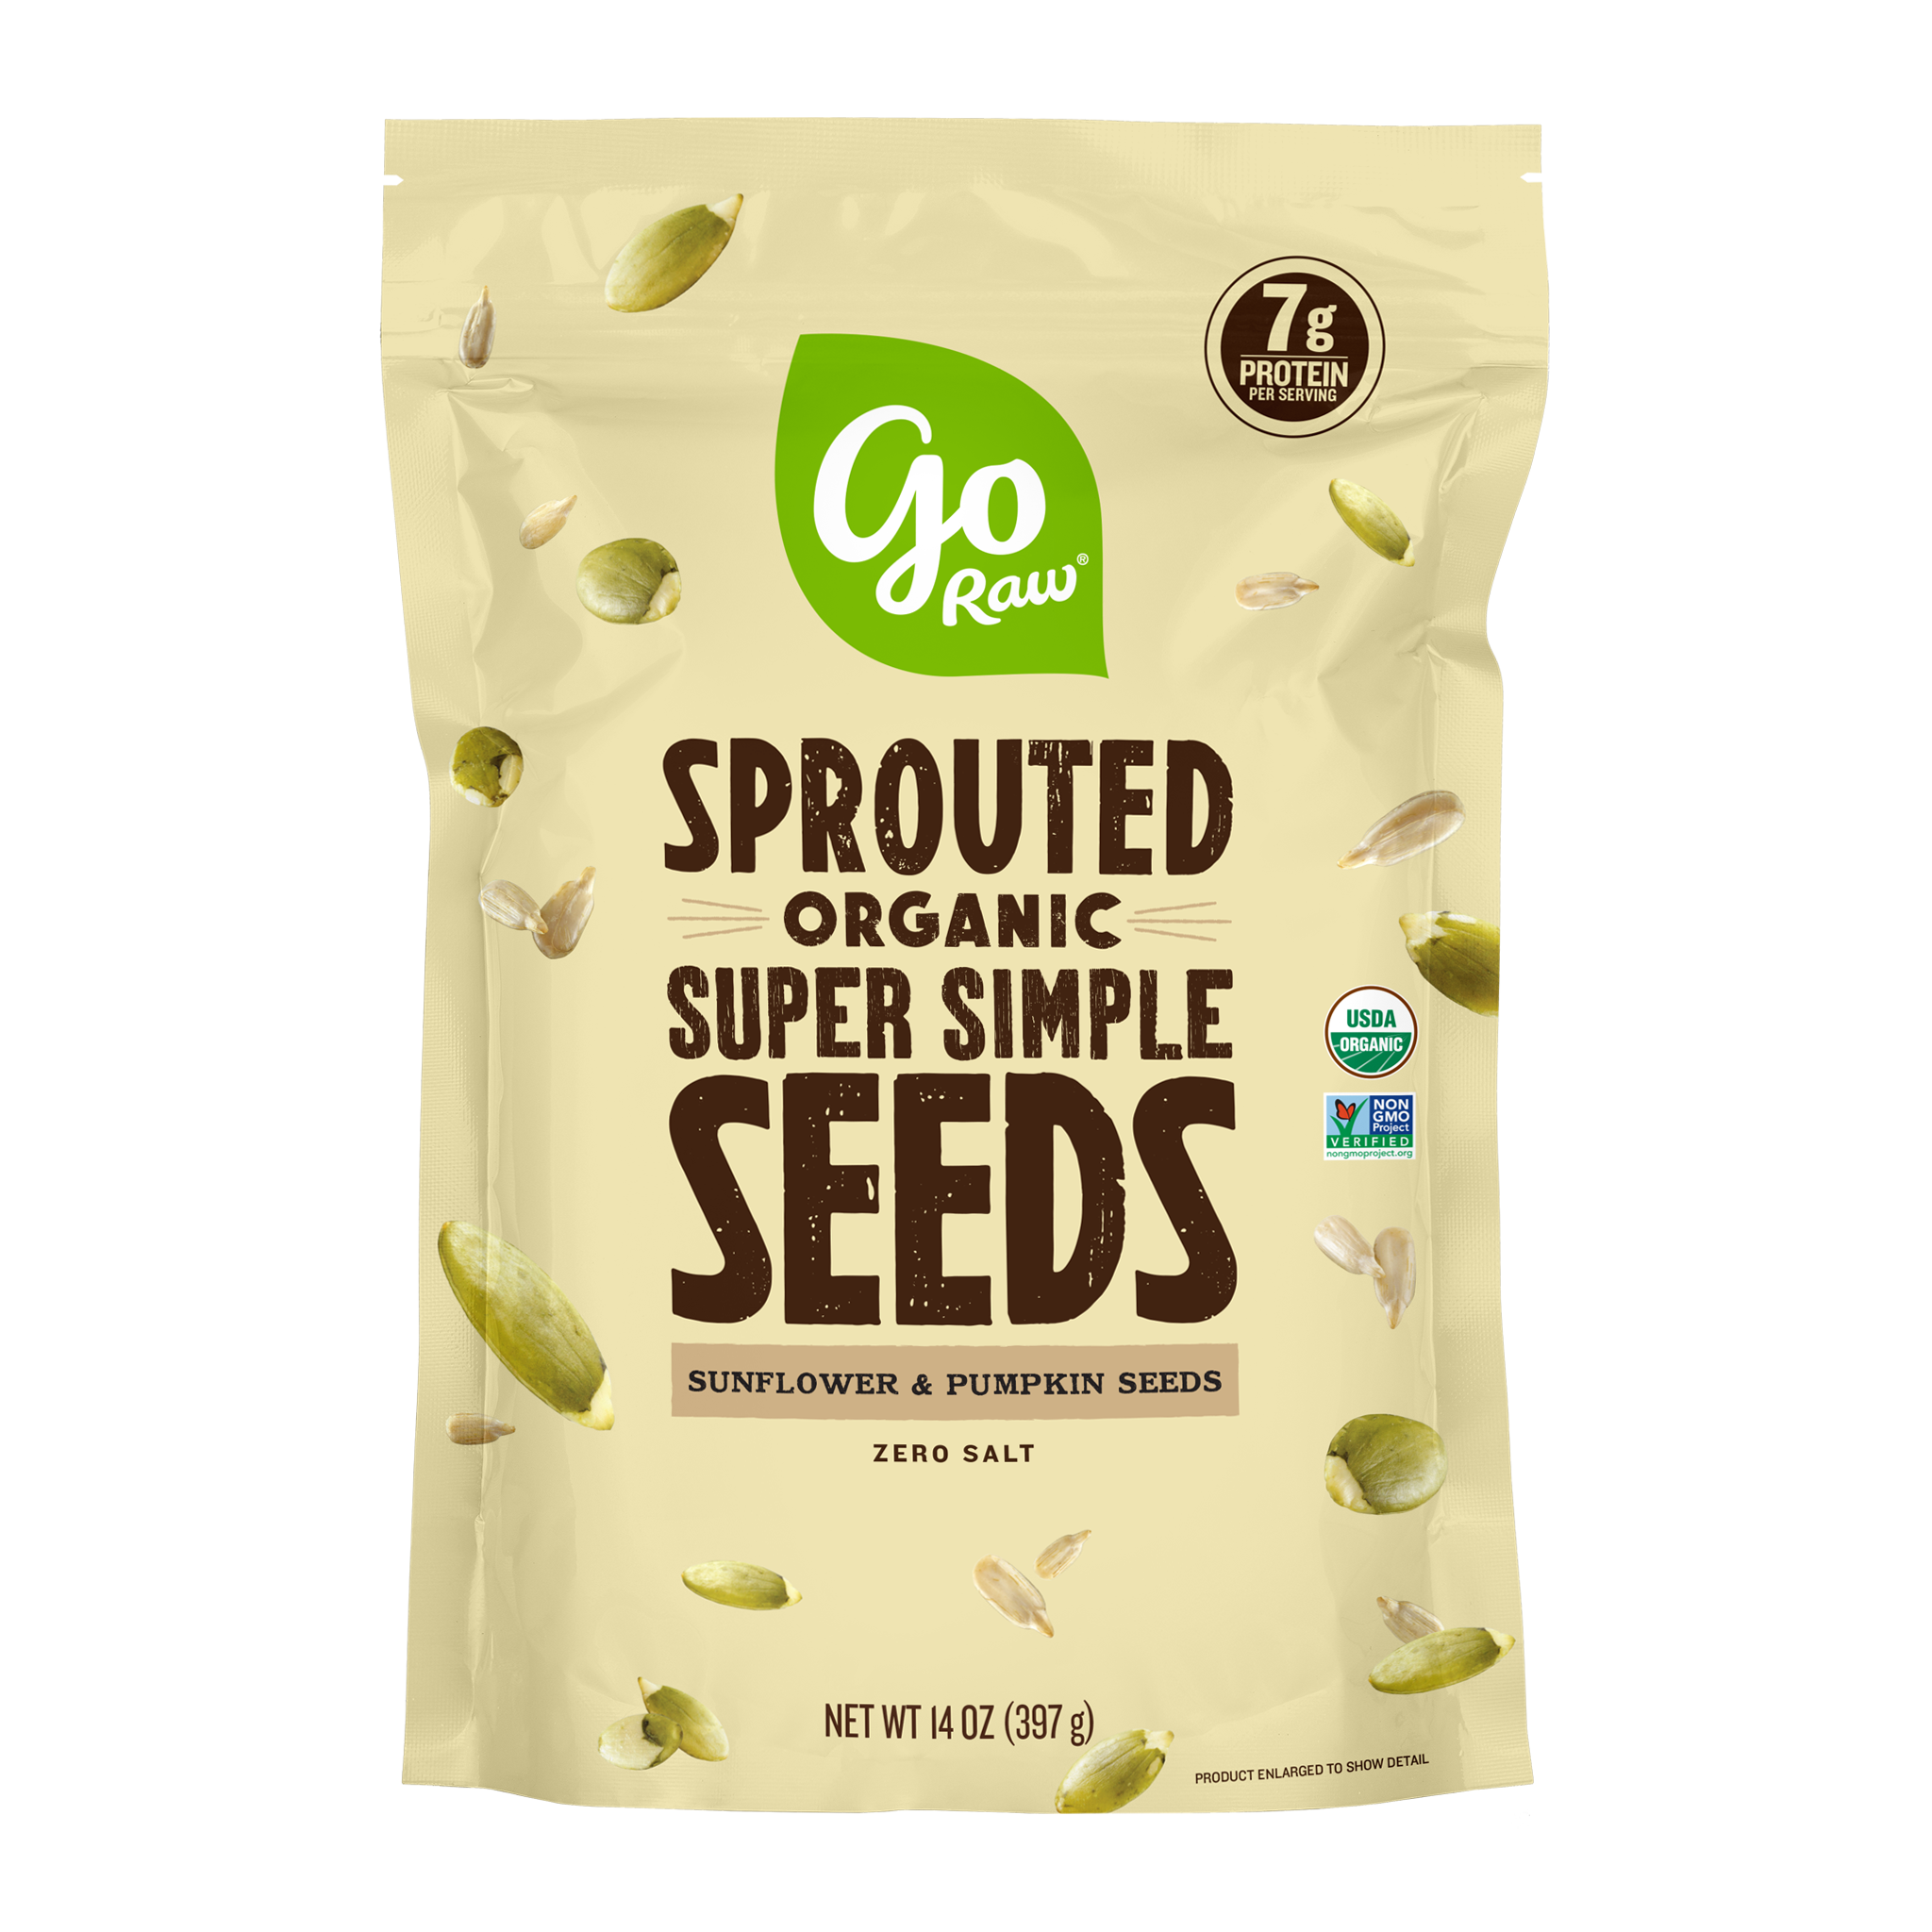 Sprouted Super Simple Seeds - 6 Bags, 14oz Each